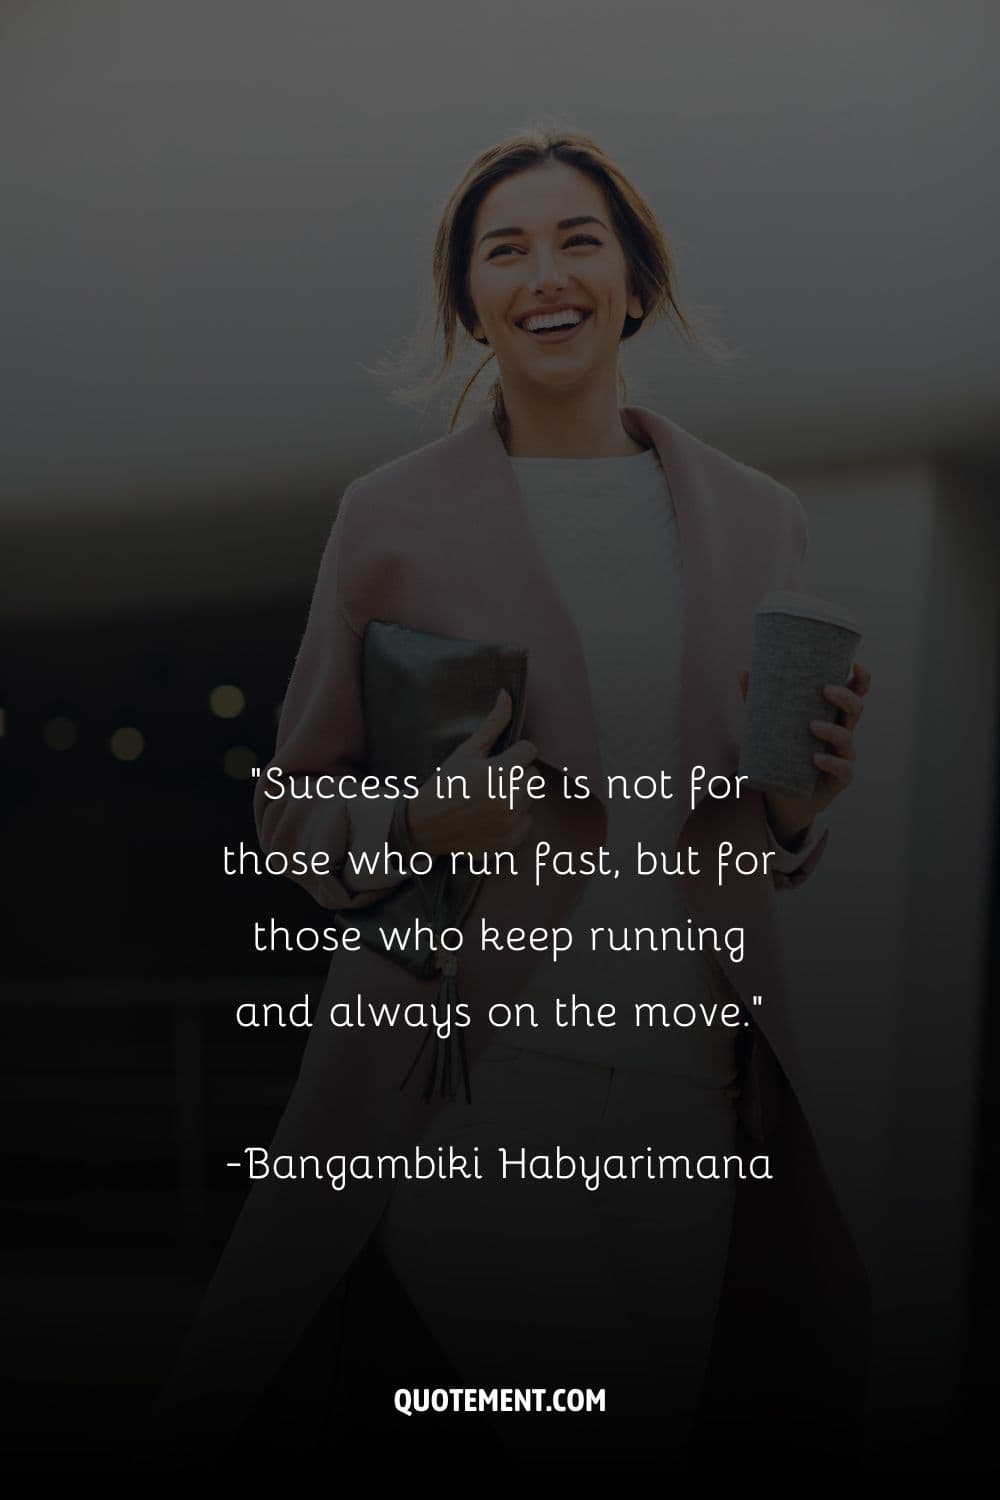 Success in life is not for those who run fast, but for those who keep running and always on the move